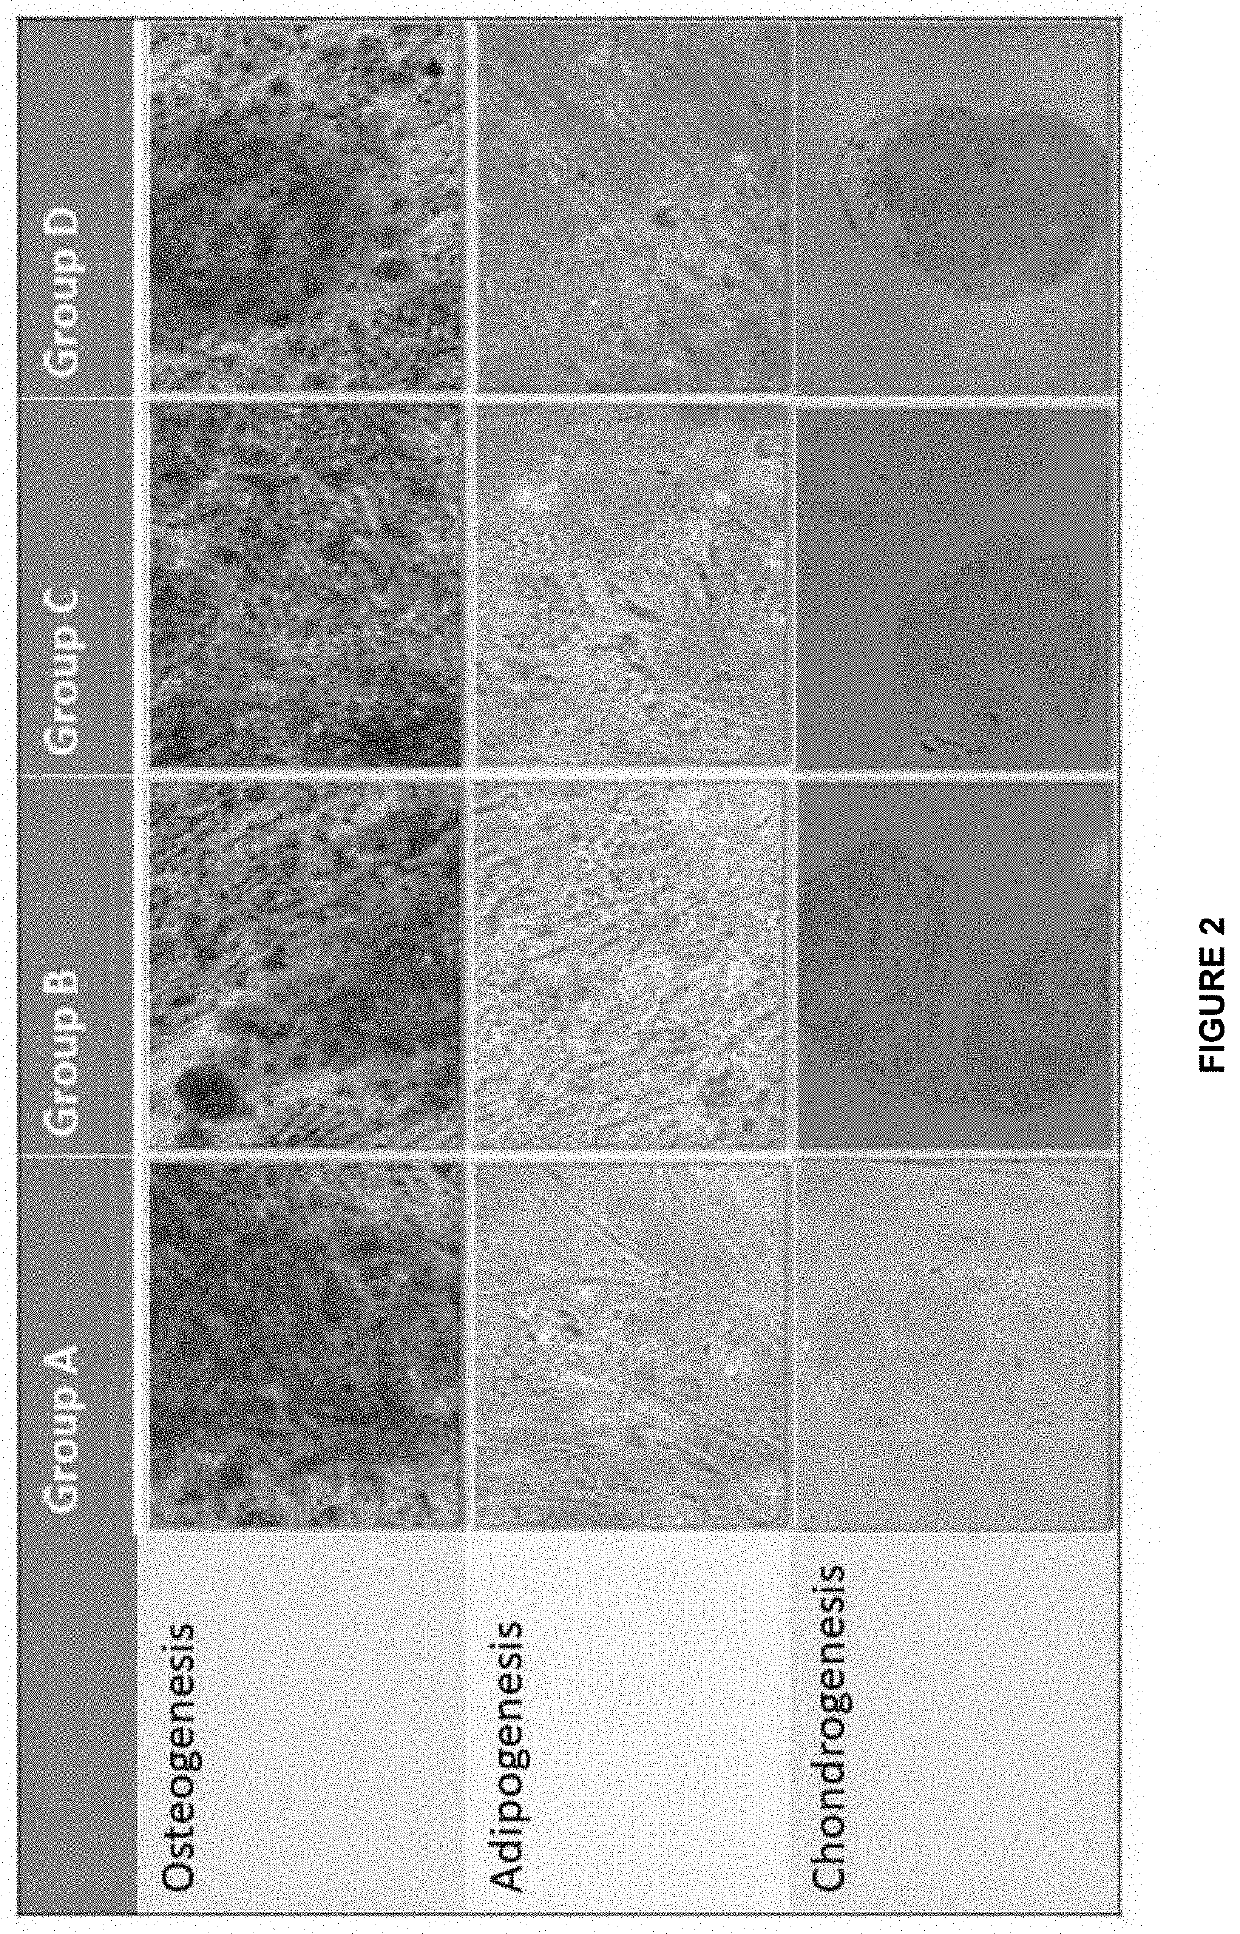 Production of therapeutics potential mesenchymal stem cells